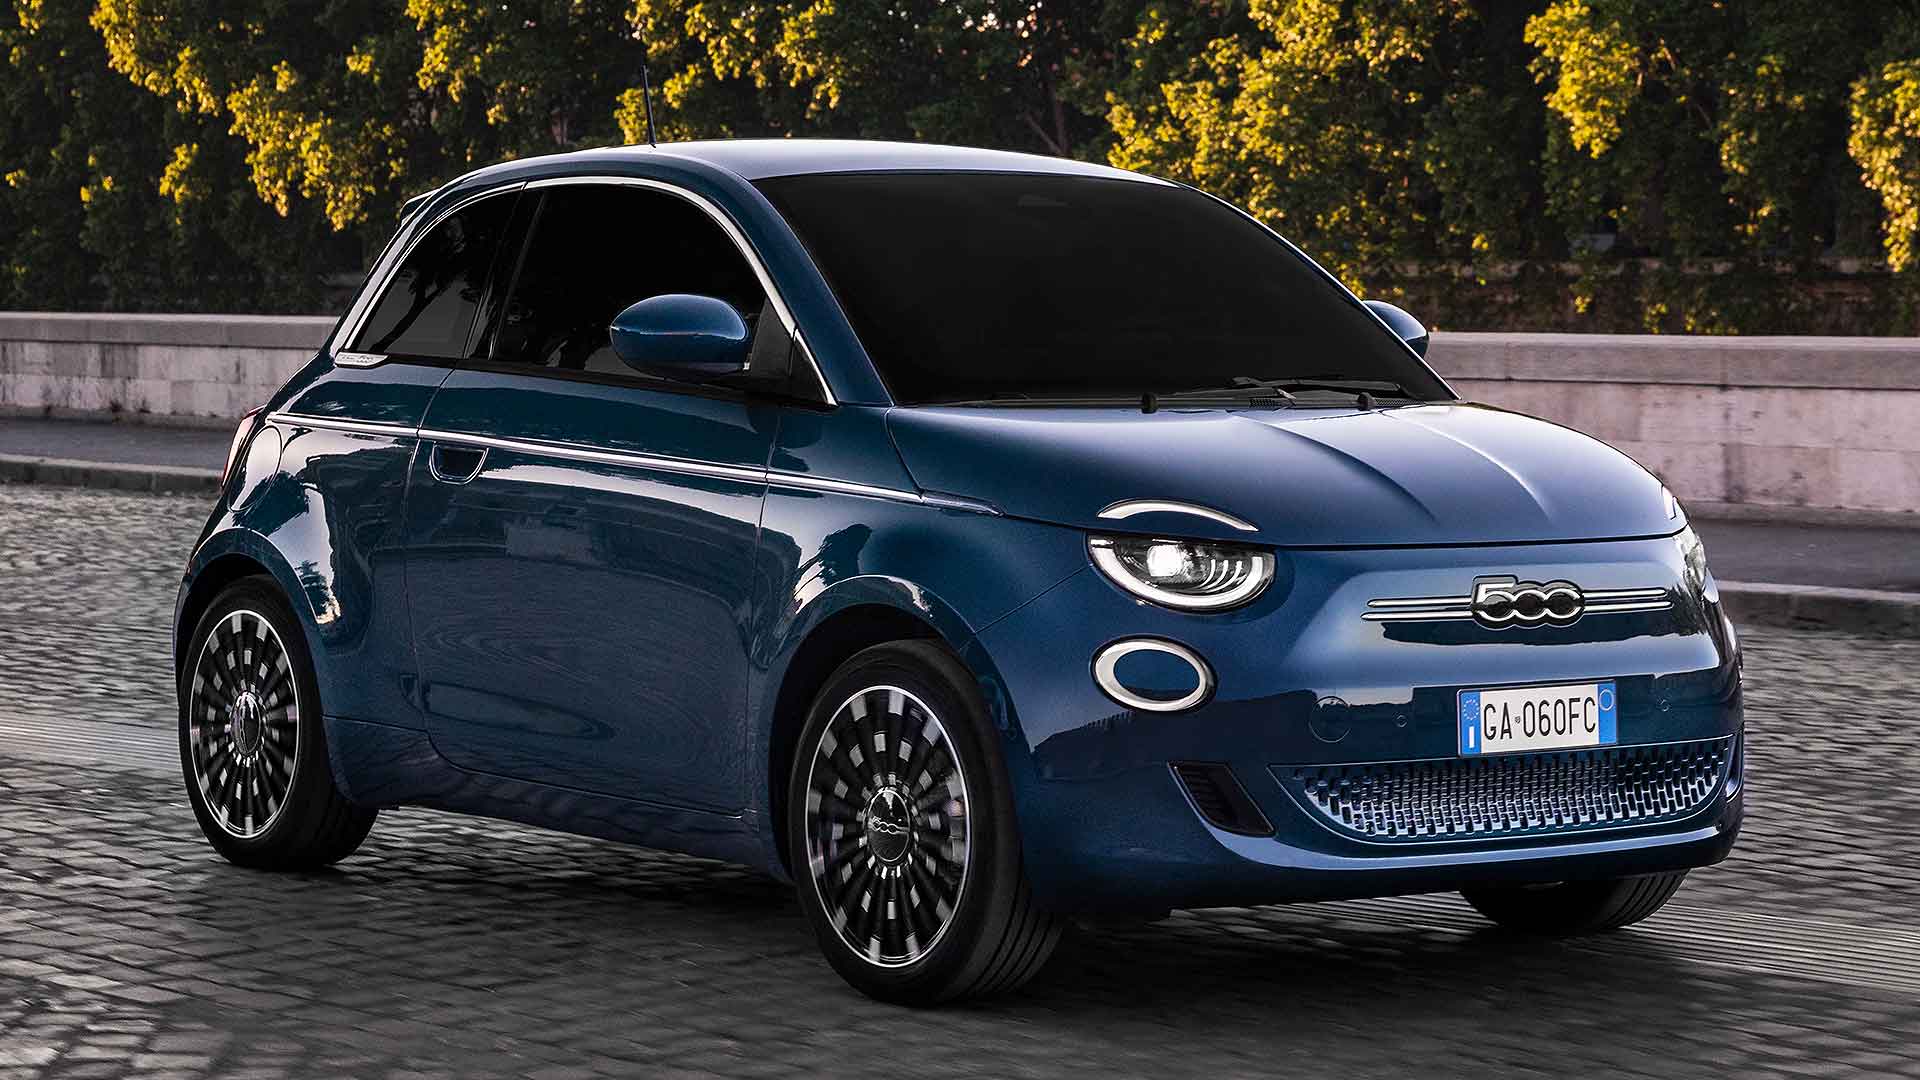 new fiat 500 Reservations open for new all-electric fiat 500 hatchback